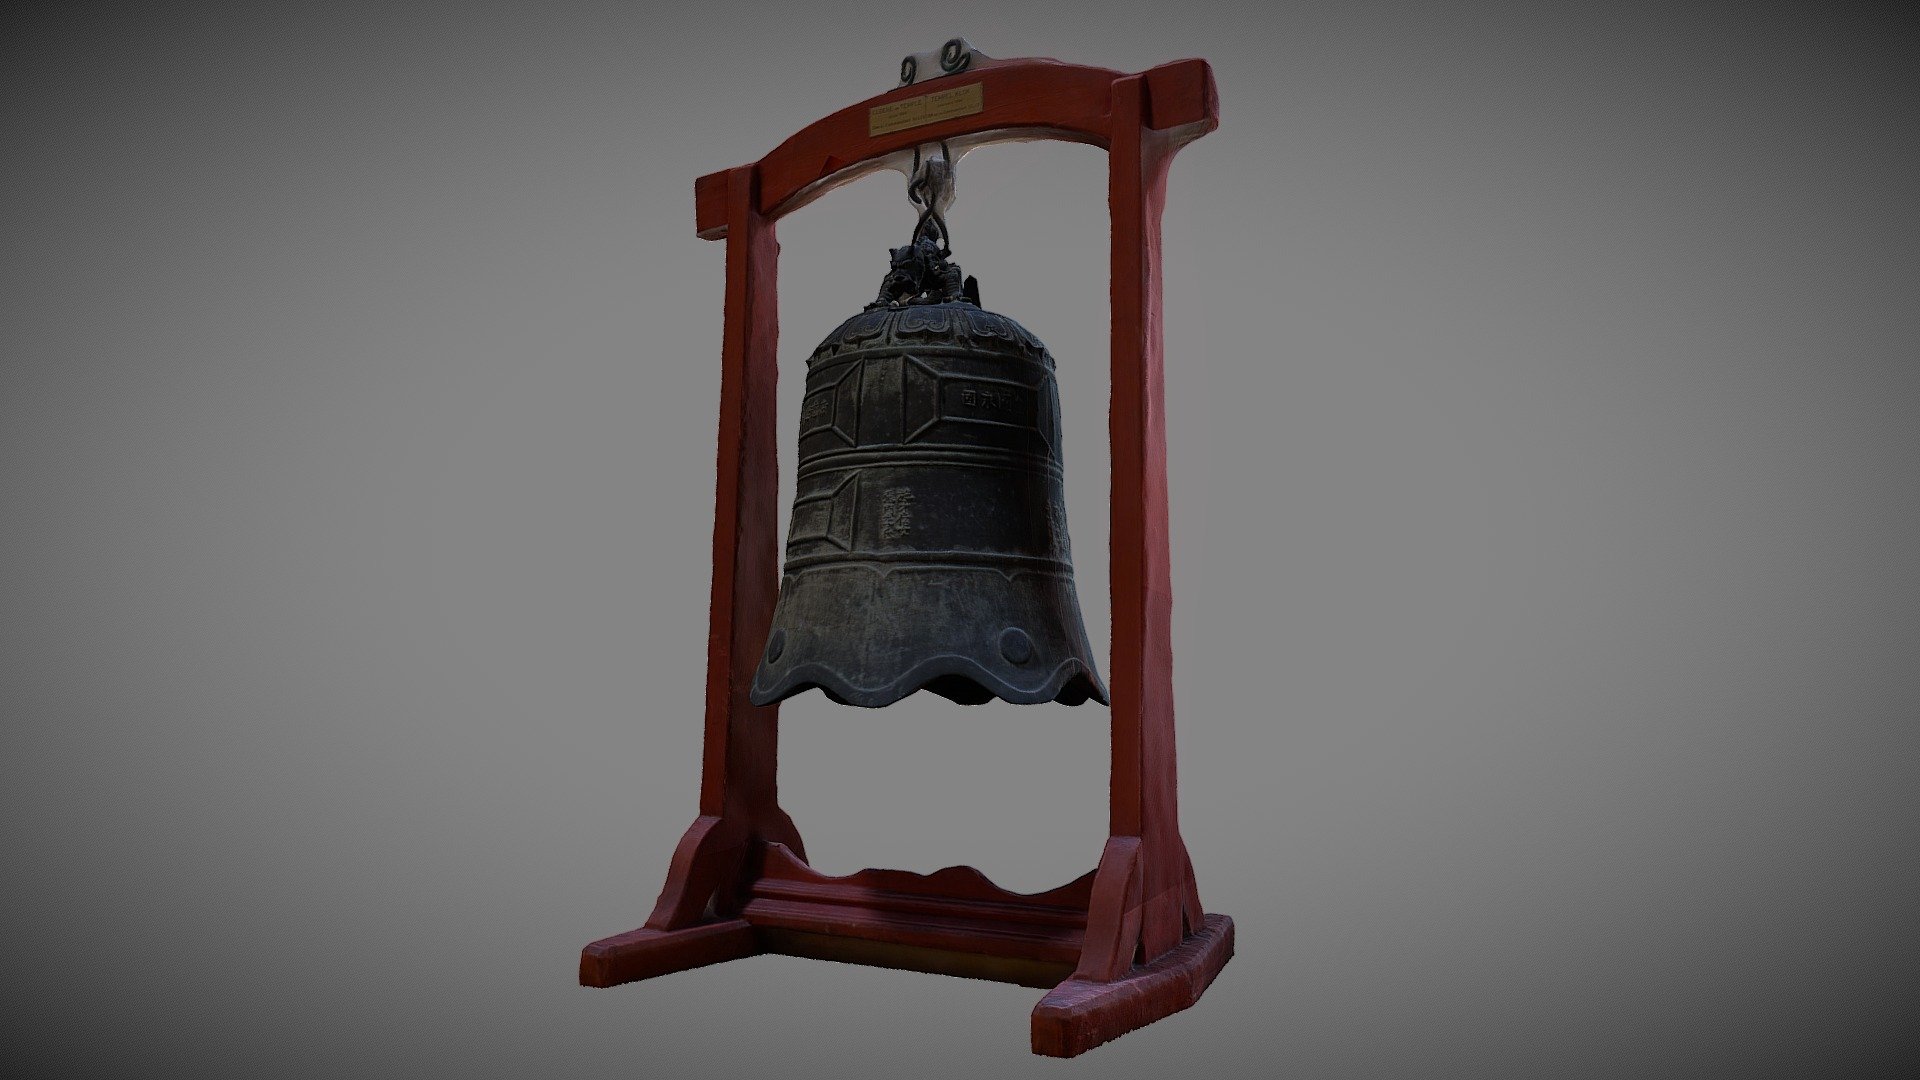 Chinese Bell, brass, 19th century, China. Musée du Cinquantenaire (Brussels, Belgium). Made with ReMake and ReCap from AutoDesk.

For more updates, please follow @GeoffreyMarchal on Twitter 3d model